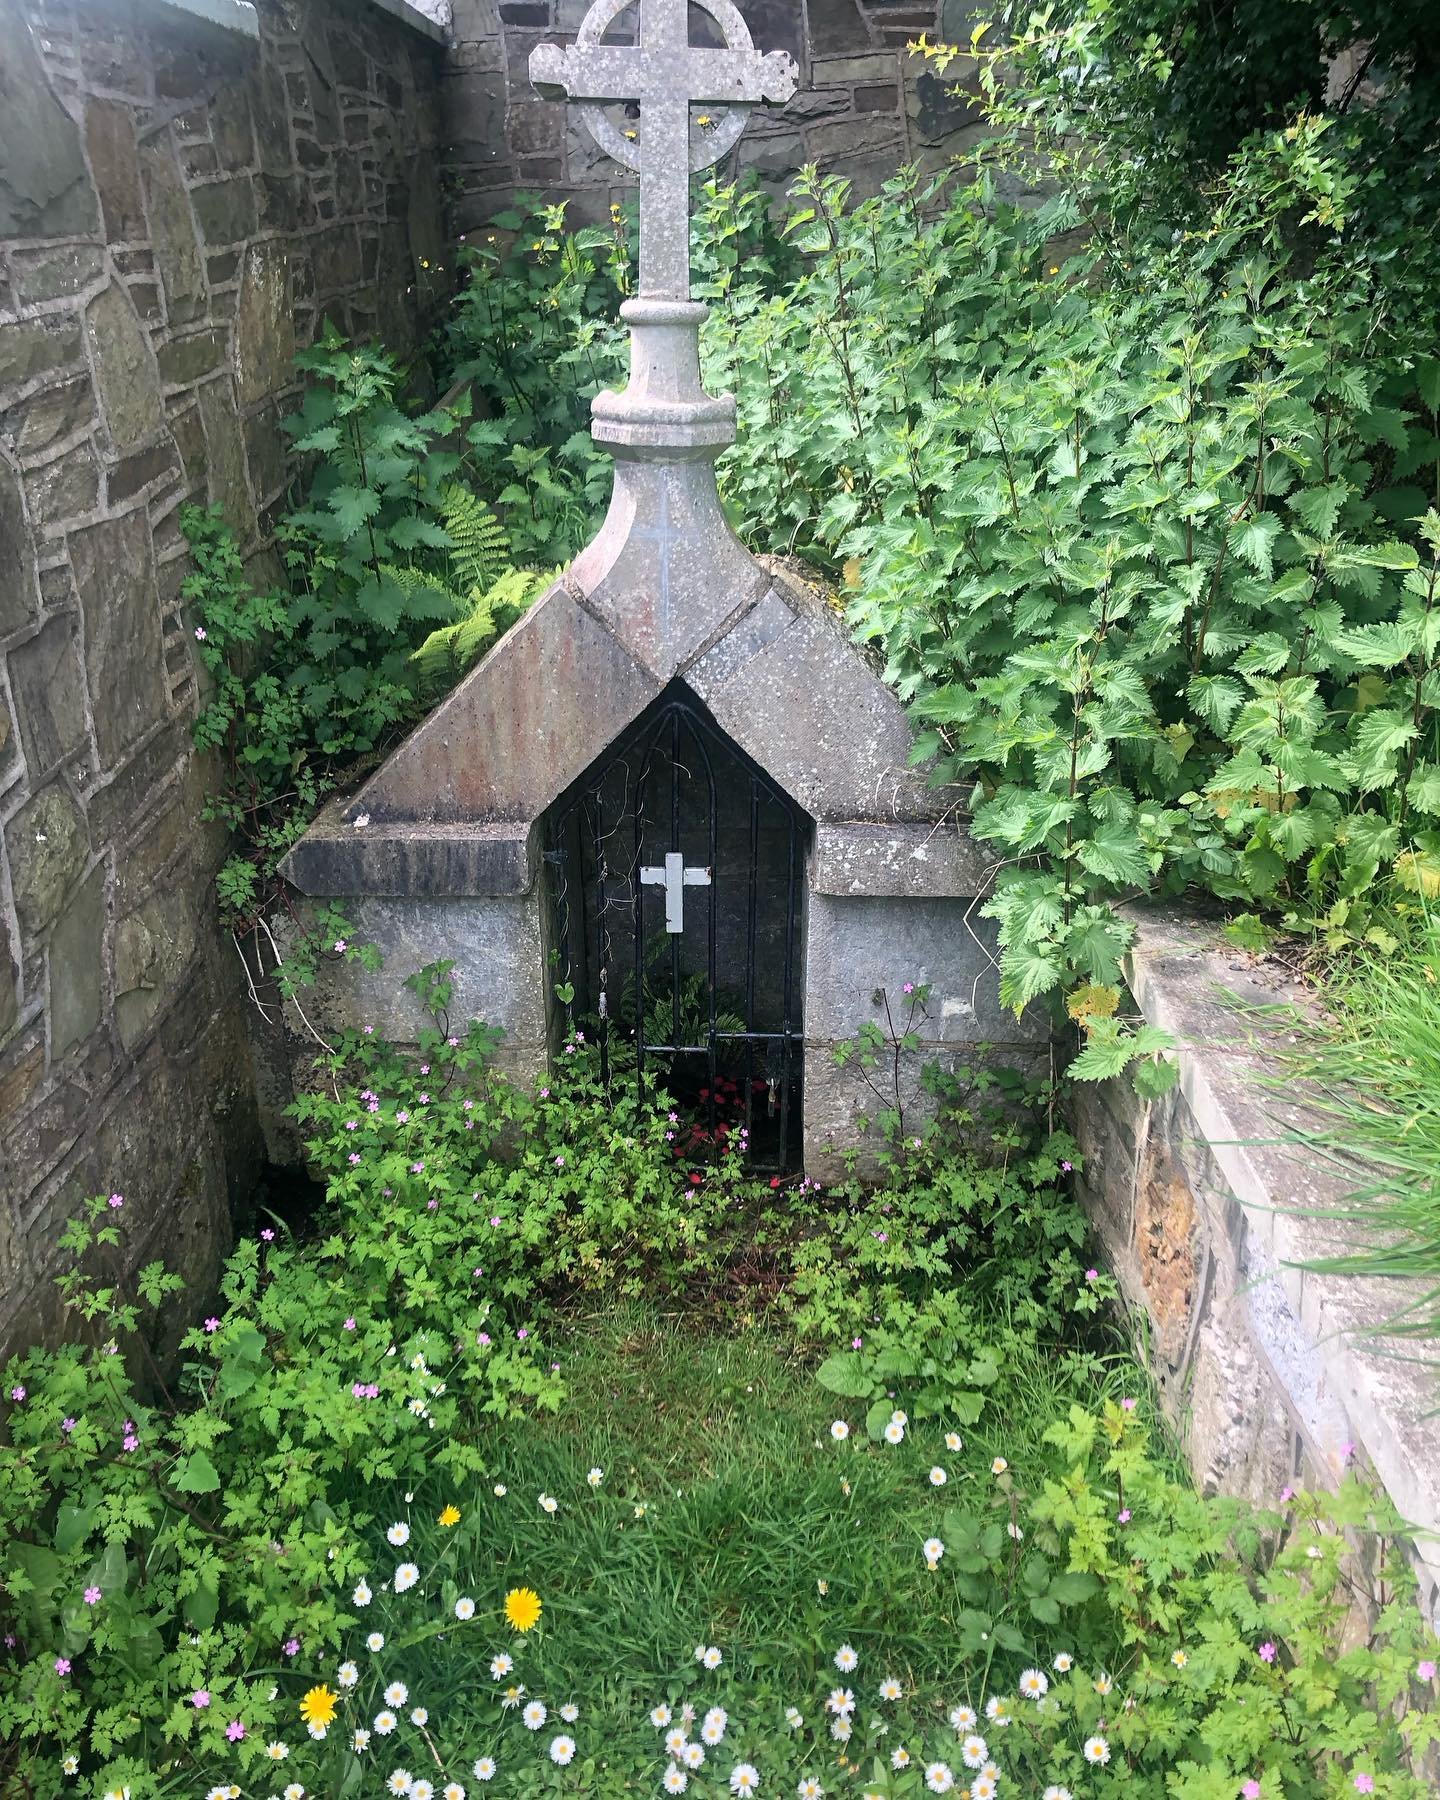 A pretty ancient holy well in cork Ireland 🌿

One of the 3,000 wells scattered and honoured for the sacred springs guarded by hawthorns the fairy 🧚&zwj;♂️ tree

Well of St Coran ☘️ known as the forgotten Saint 

#sacredwells 
#springwater 
#corkire